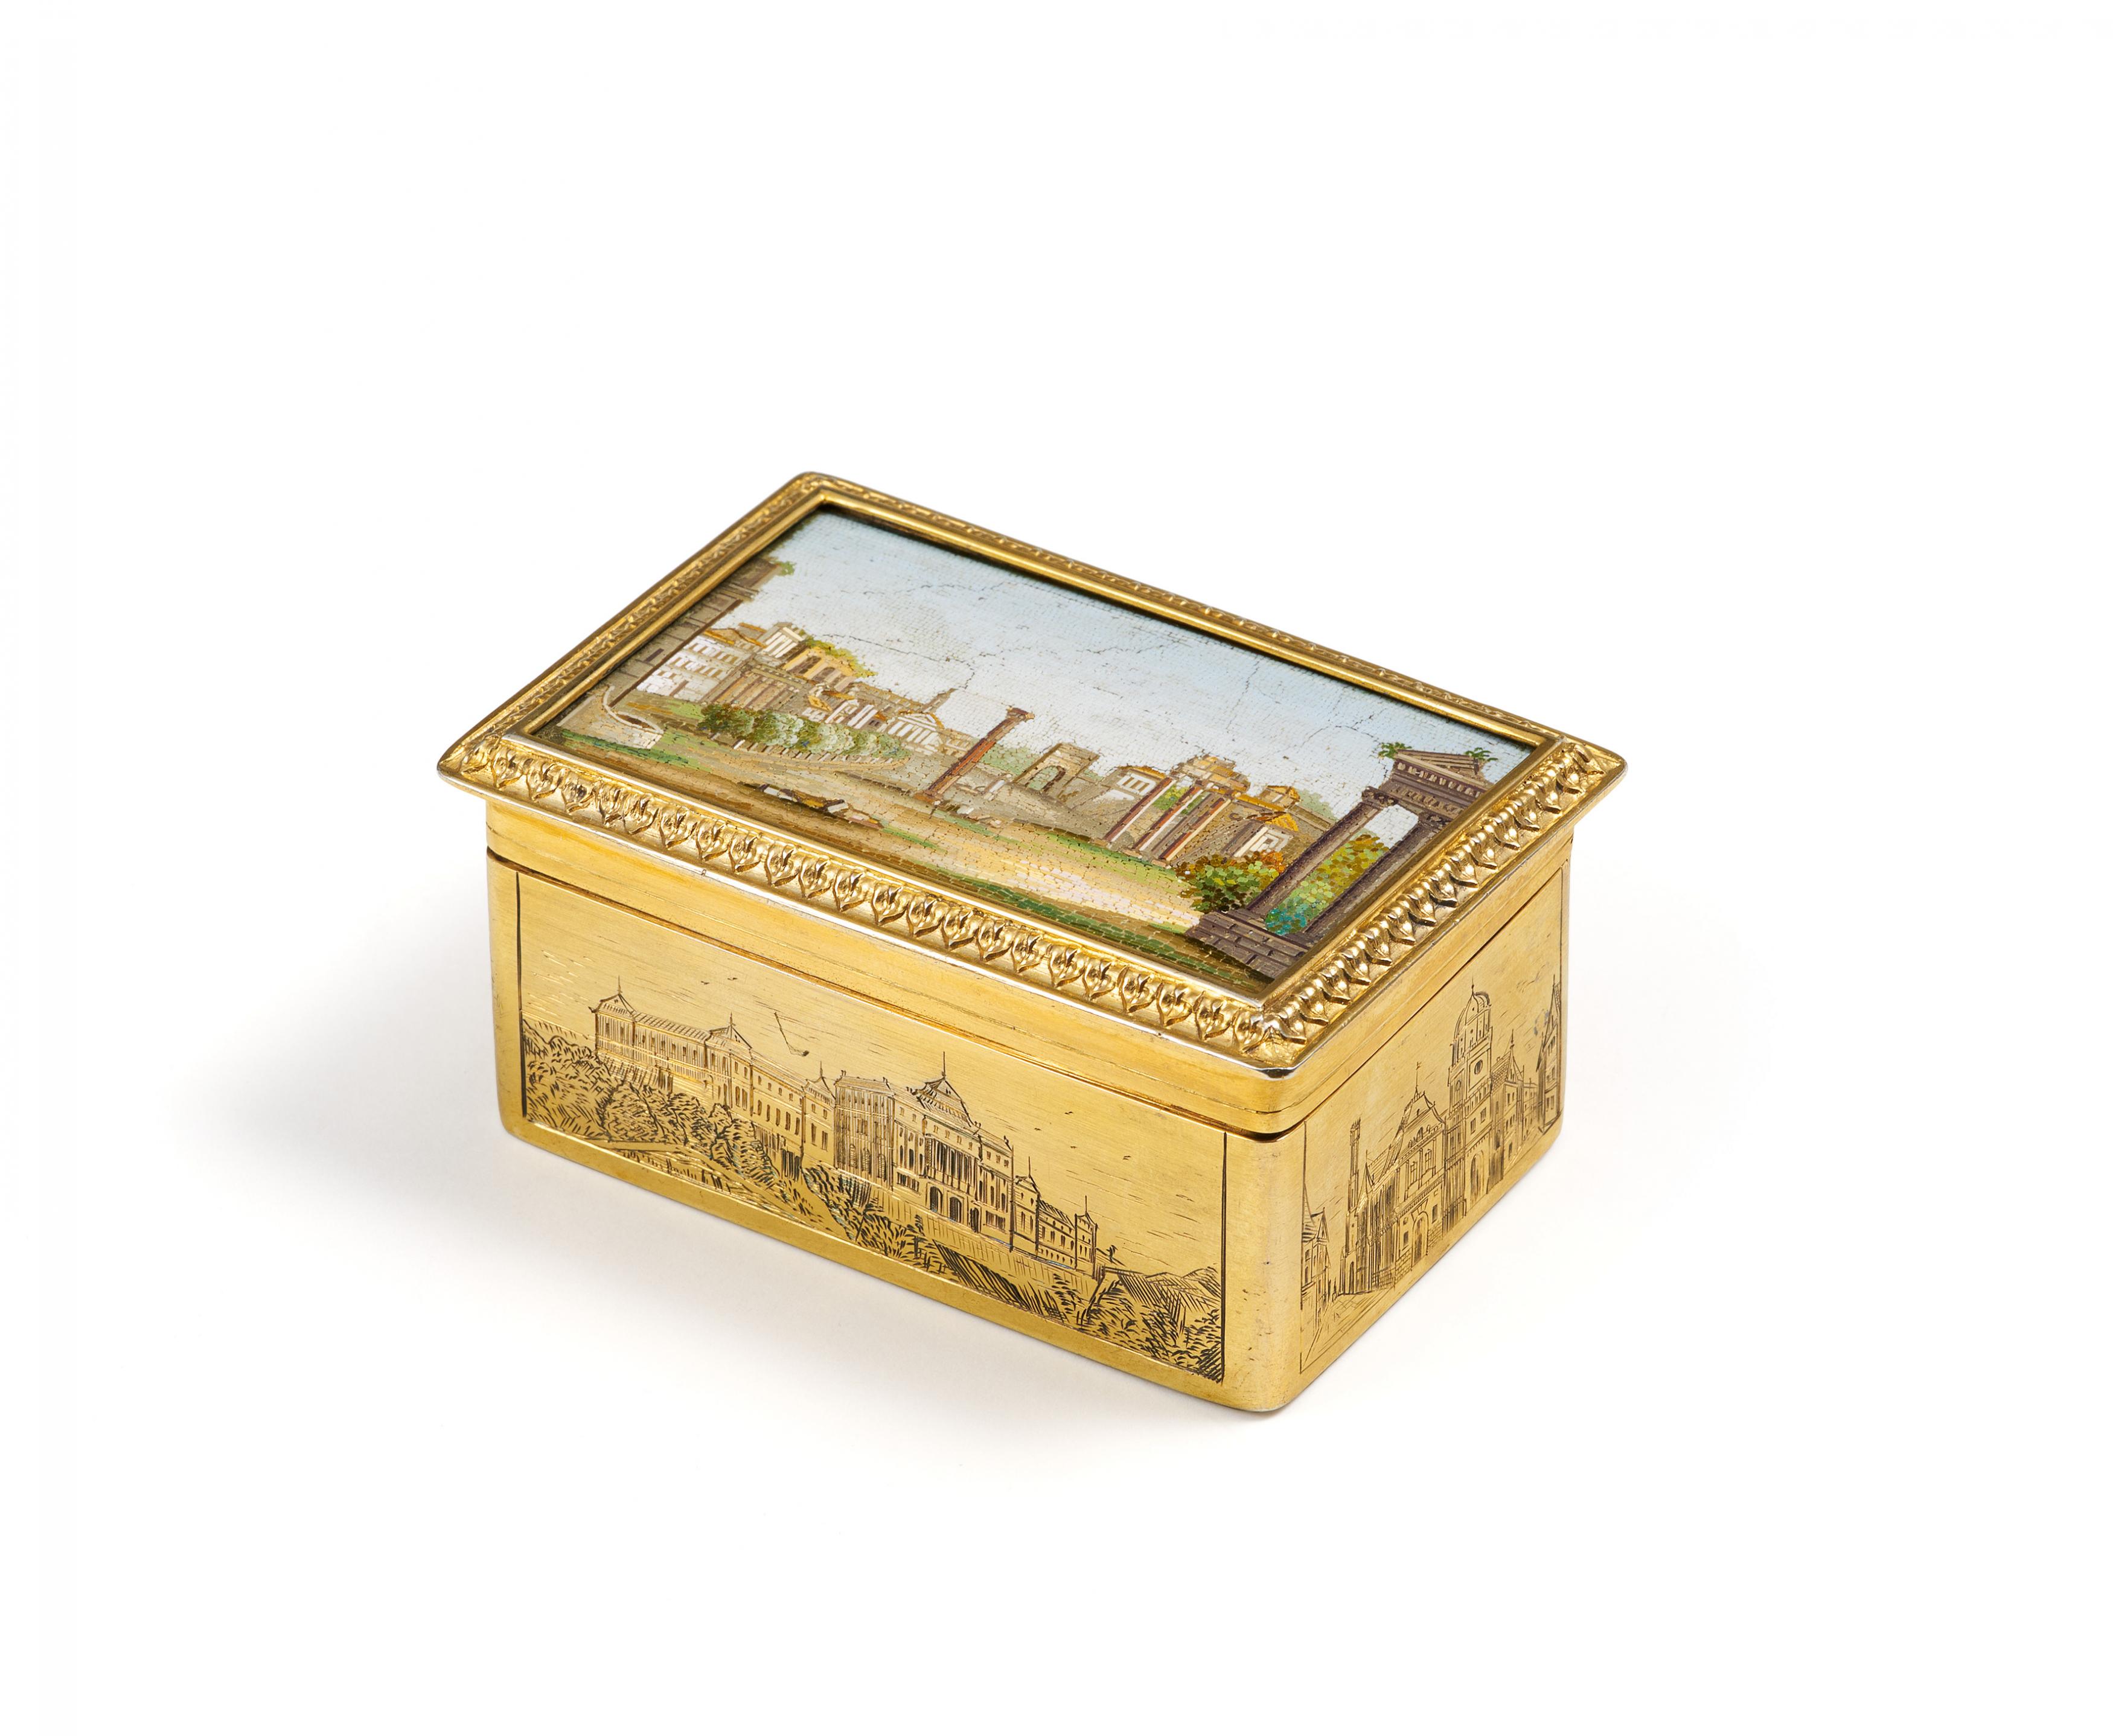 Two exquisite gilt silver and glass snuffboxes with cityscapes of rome in micro mosaic - Image 2 of 14